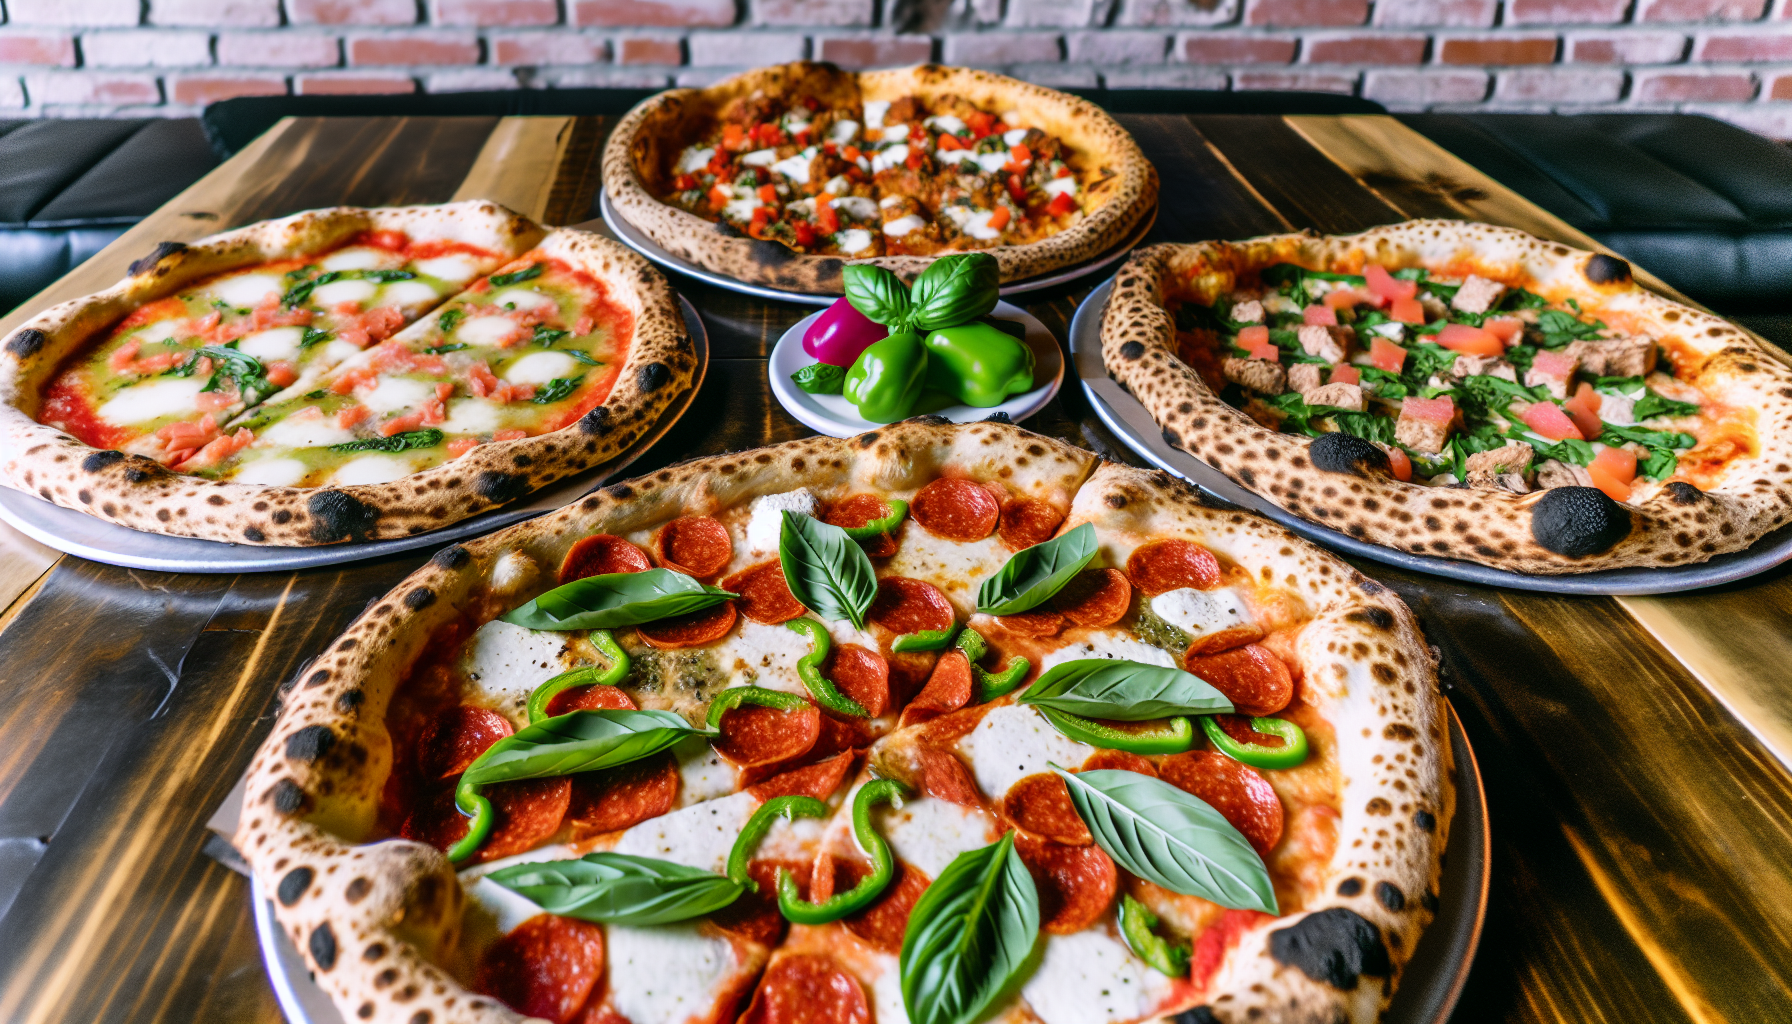 A variety of delicious pizzas on display